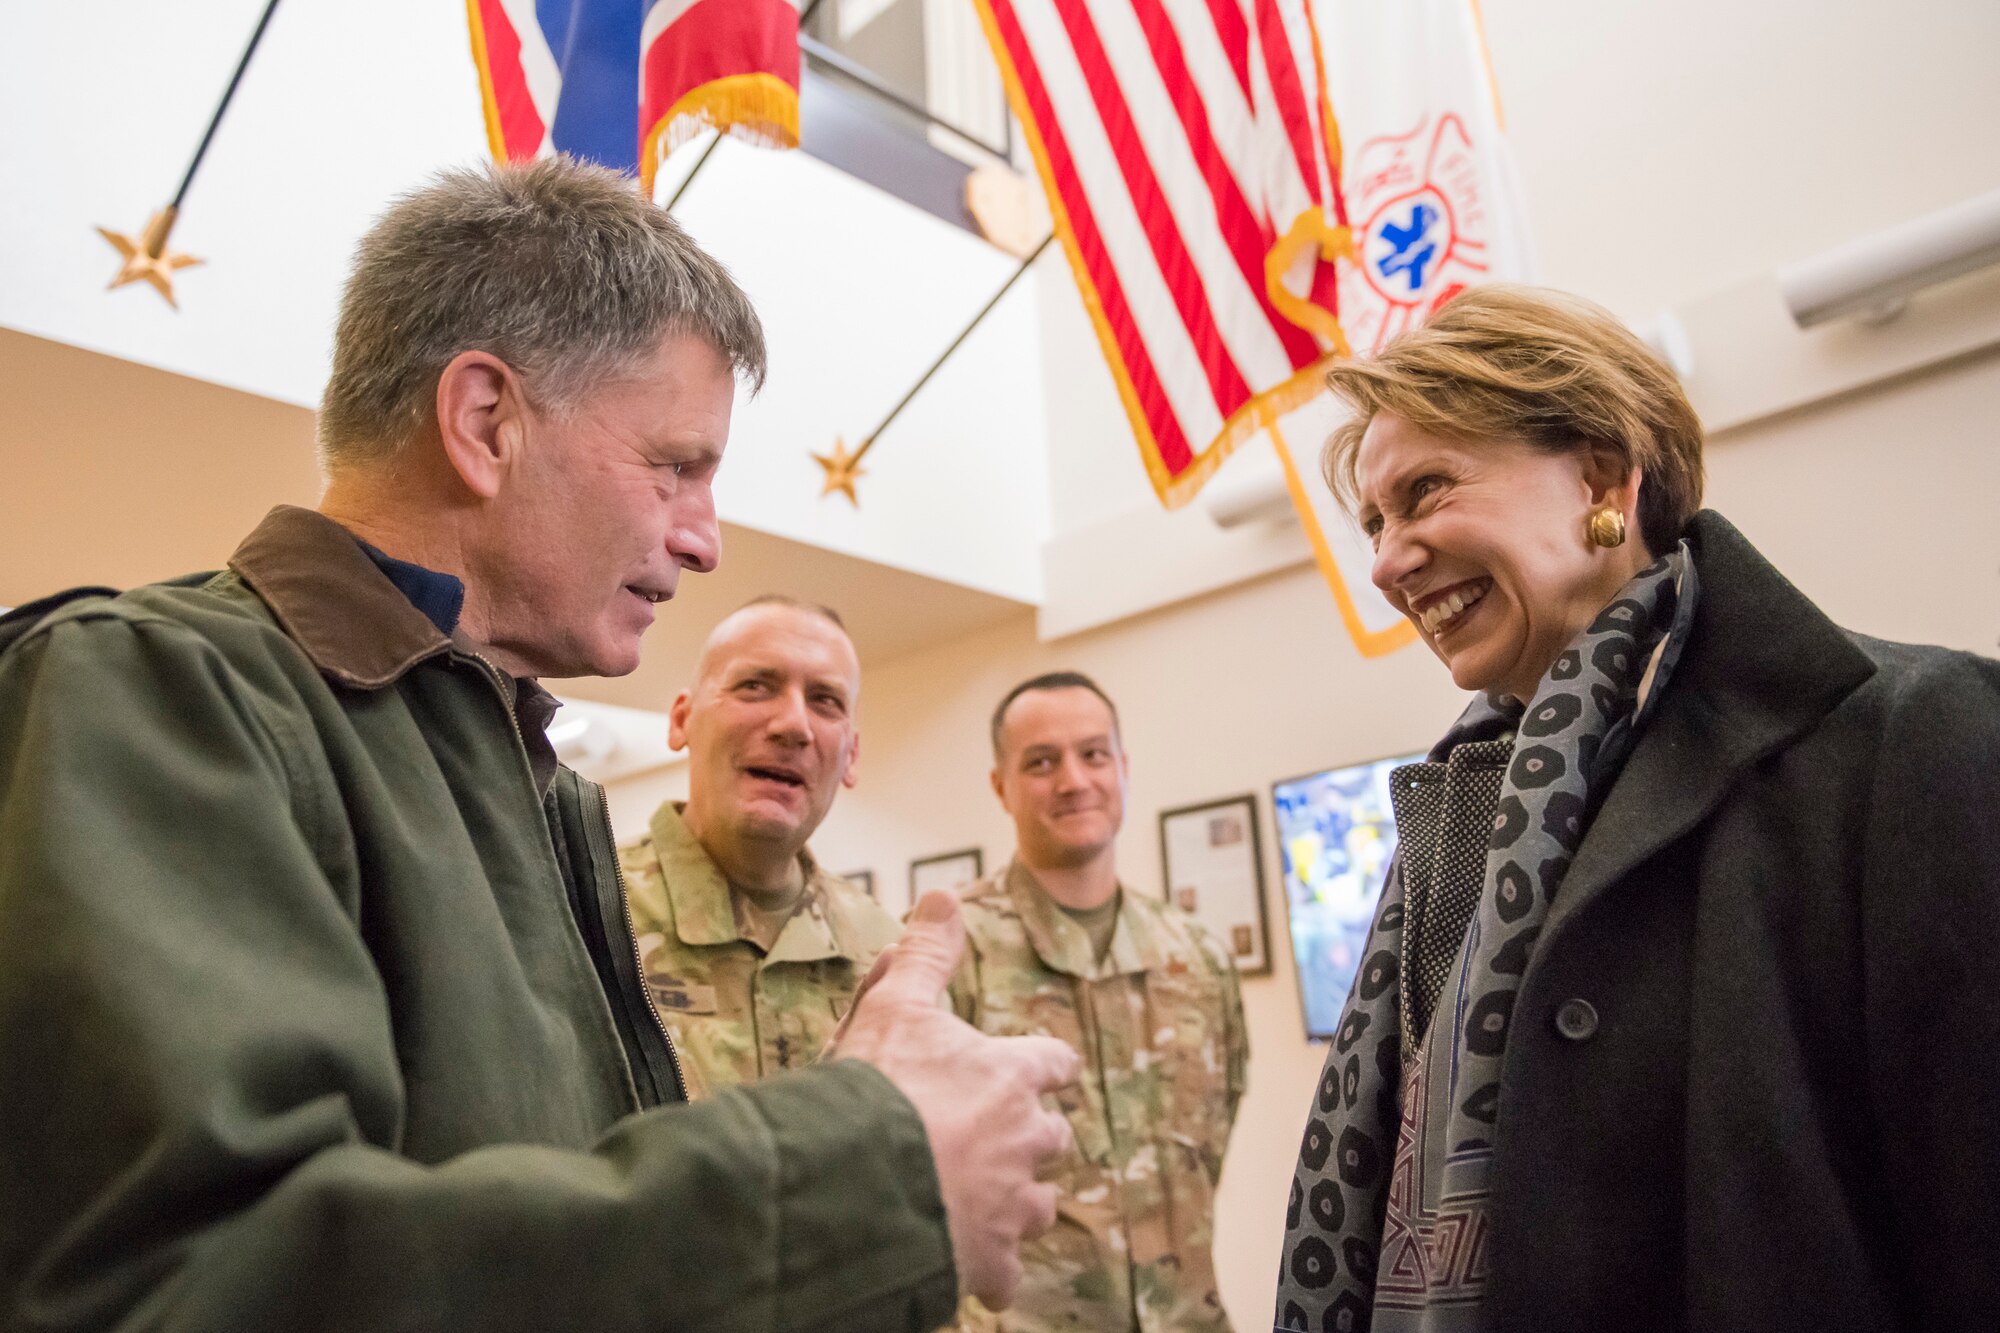 Wyoming Governor Mark Gordon welcomes Secretary of the Air Force Barbara Barrett at the 153d Airlift Wing, Wyoming Air National Guard Base, Cheyenne, Wyo., Oct. 27, 2019. This visit marks Barrett's first official visit since becoming the SECAF.